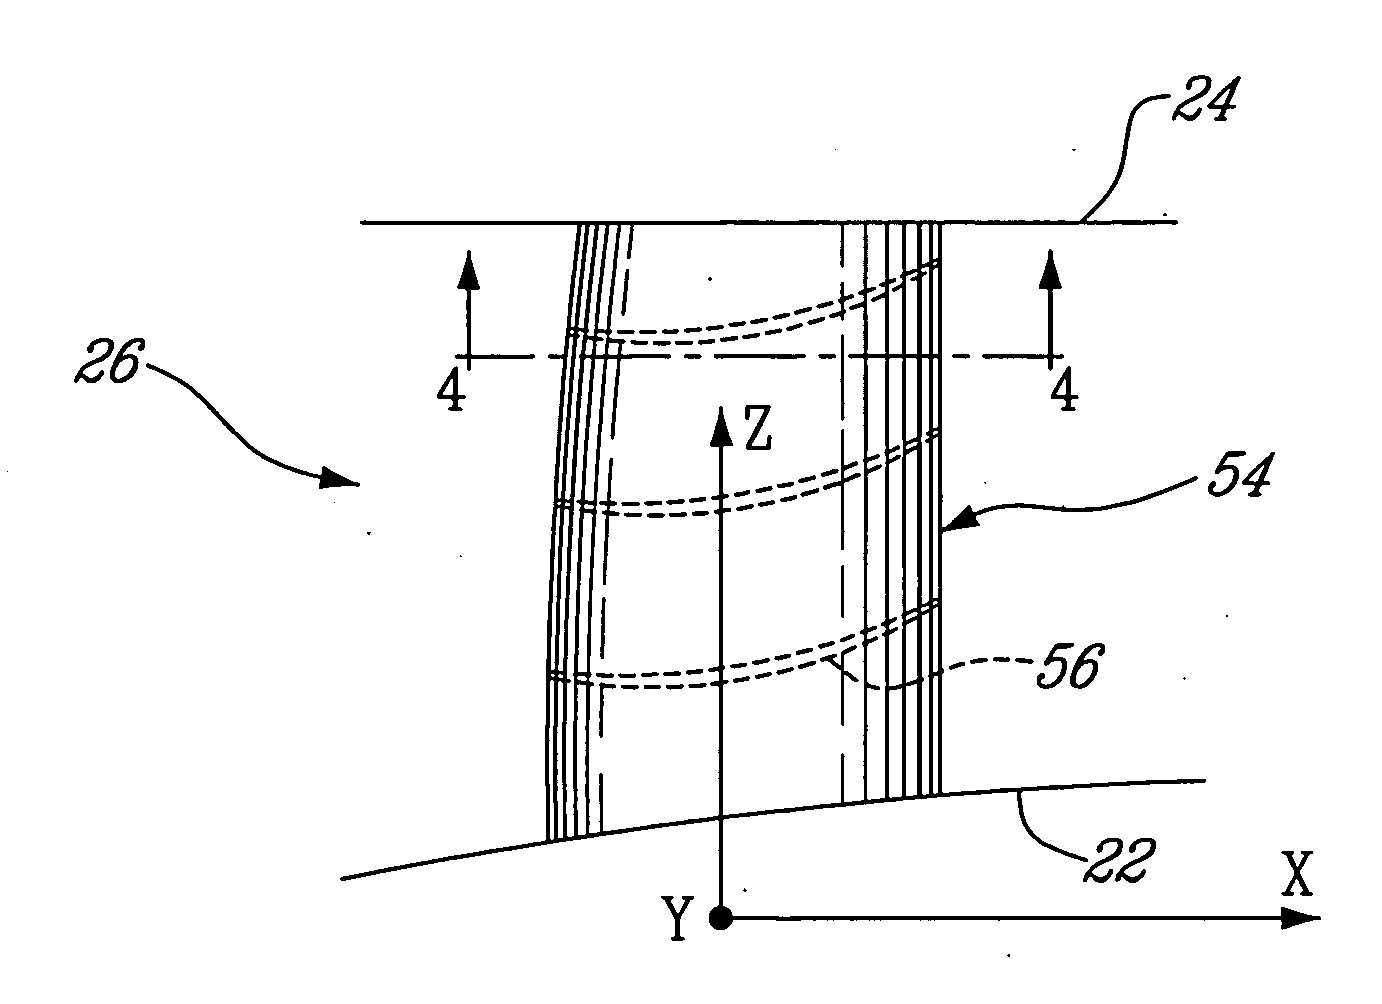 Turbine exhaust strut airfoil and gas path profile